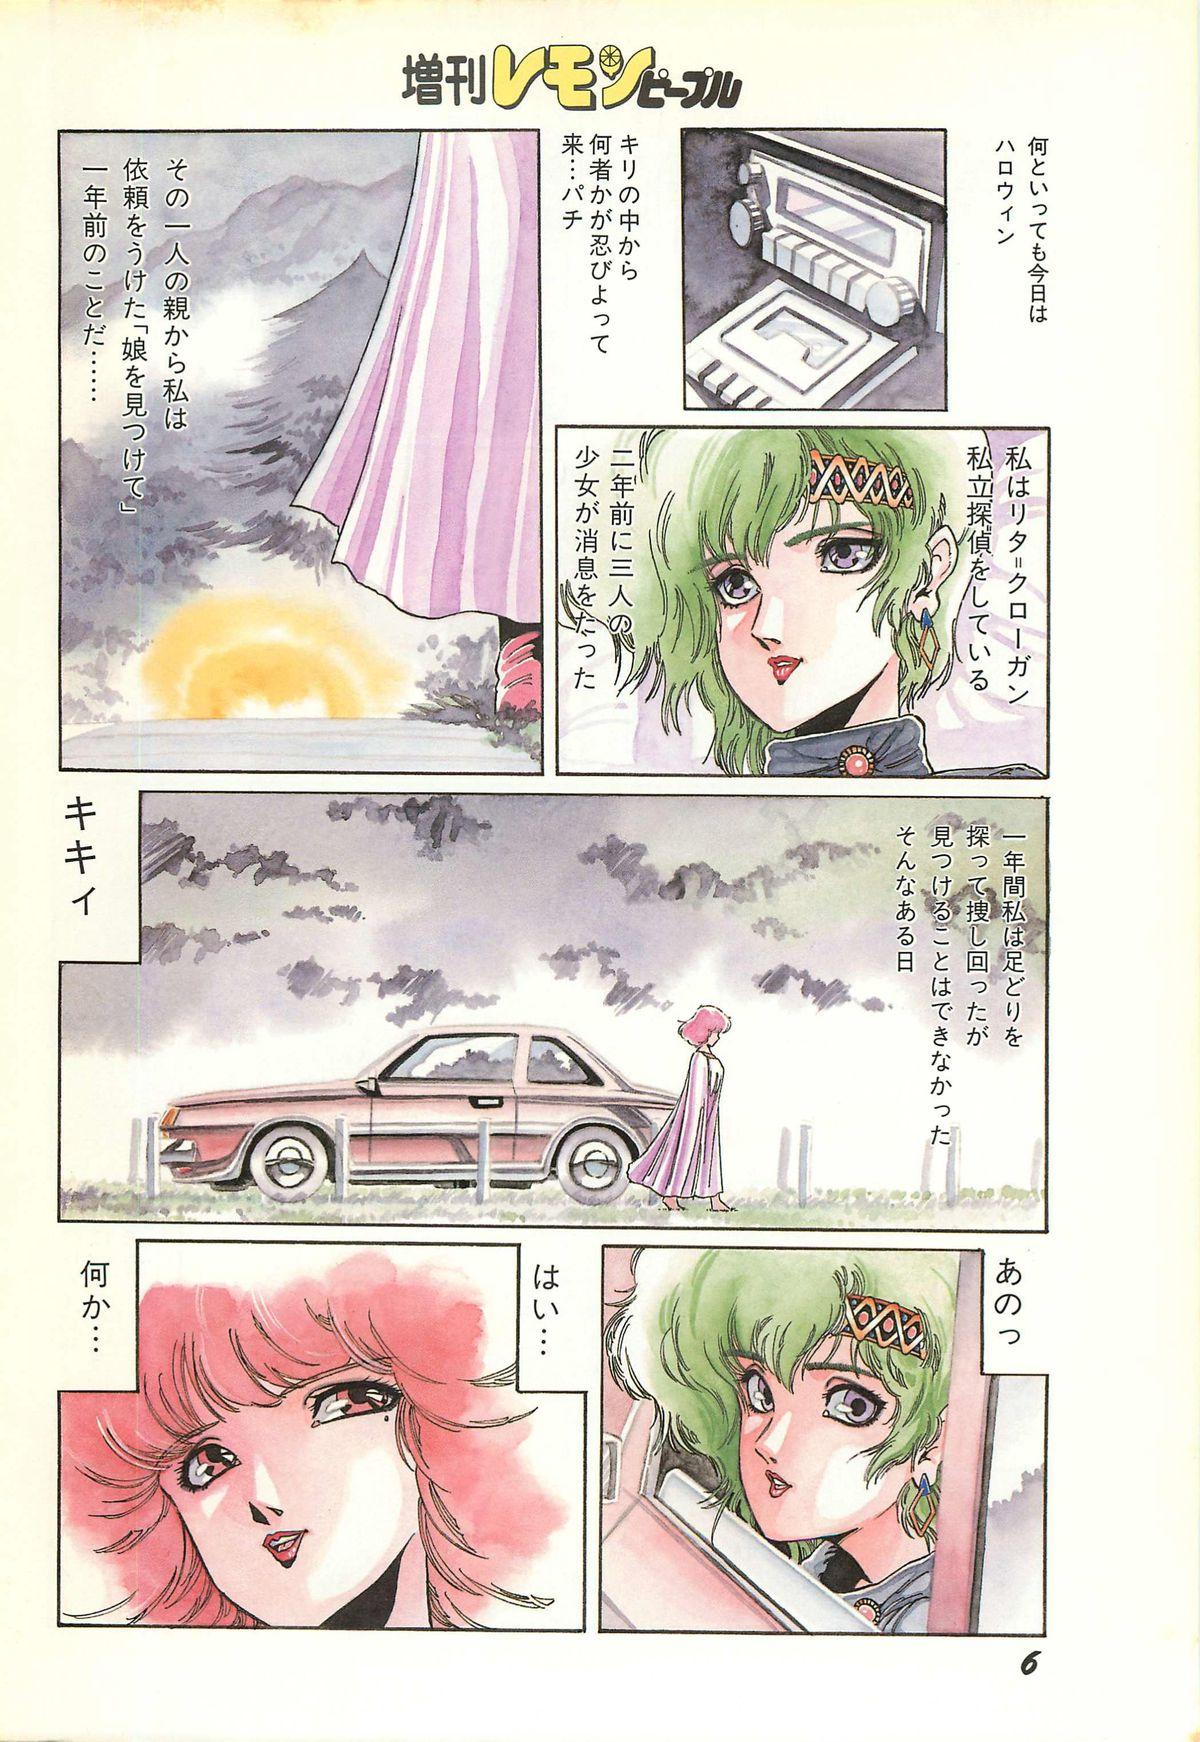 Leather Lemon People 1986-11 Zoukangou Vol. 65 All Color Gay Anal - Page 8